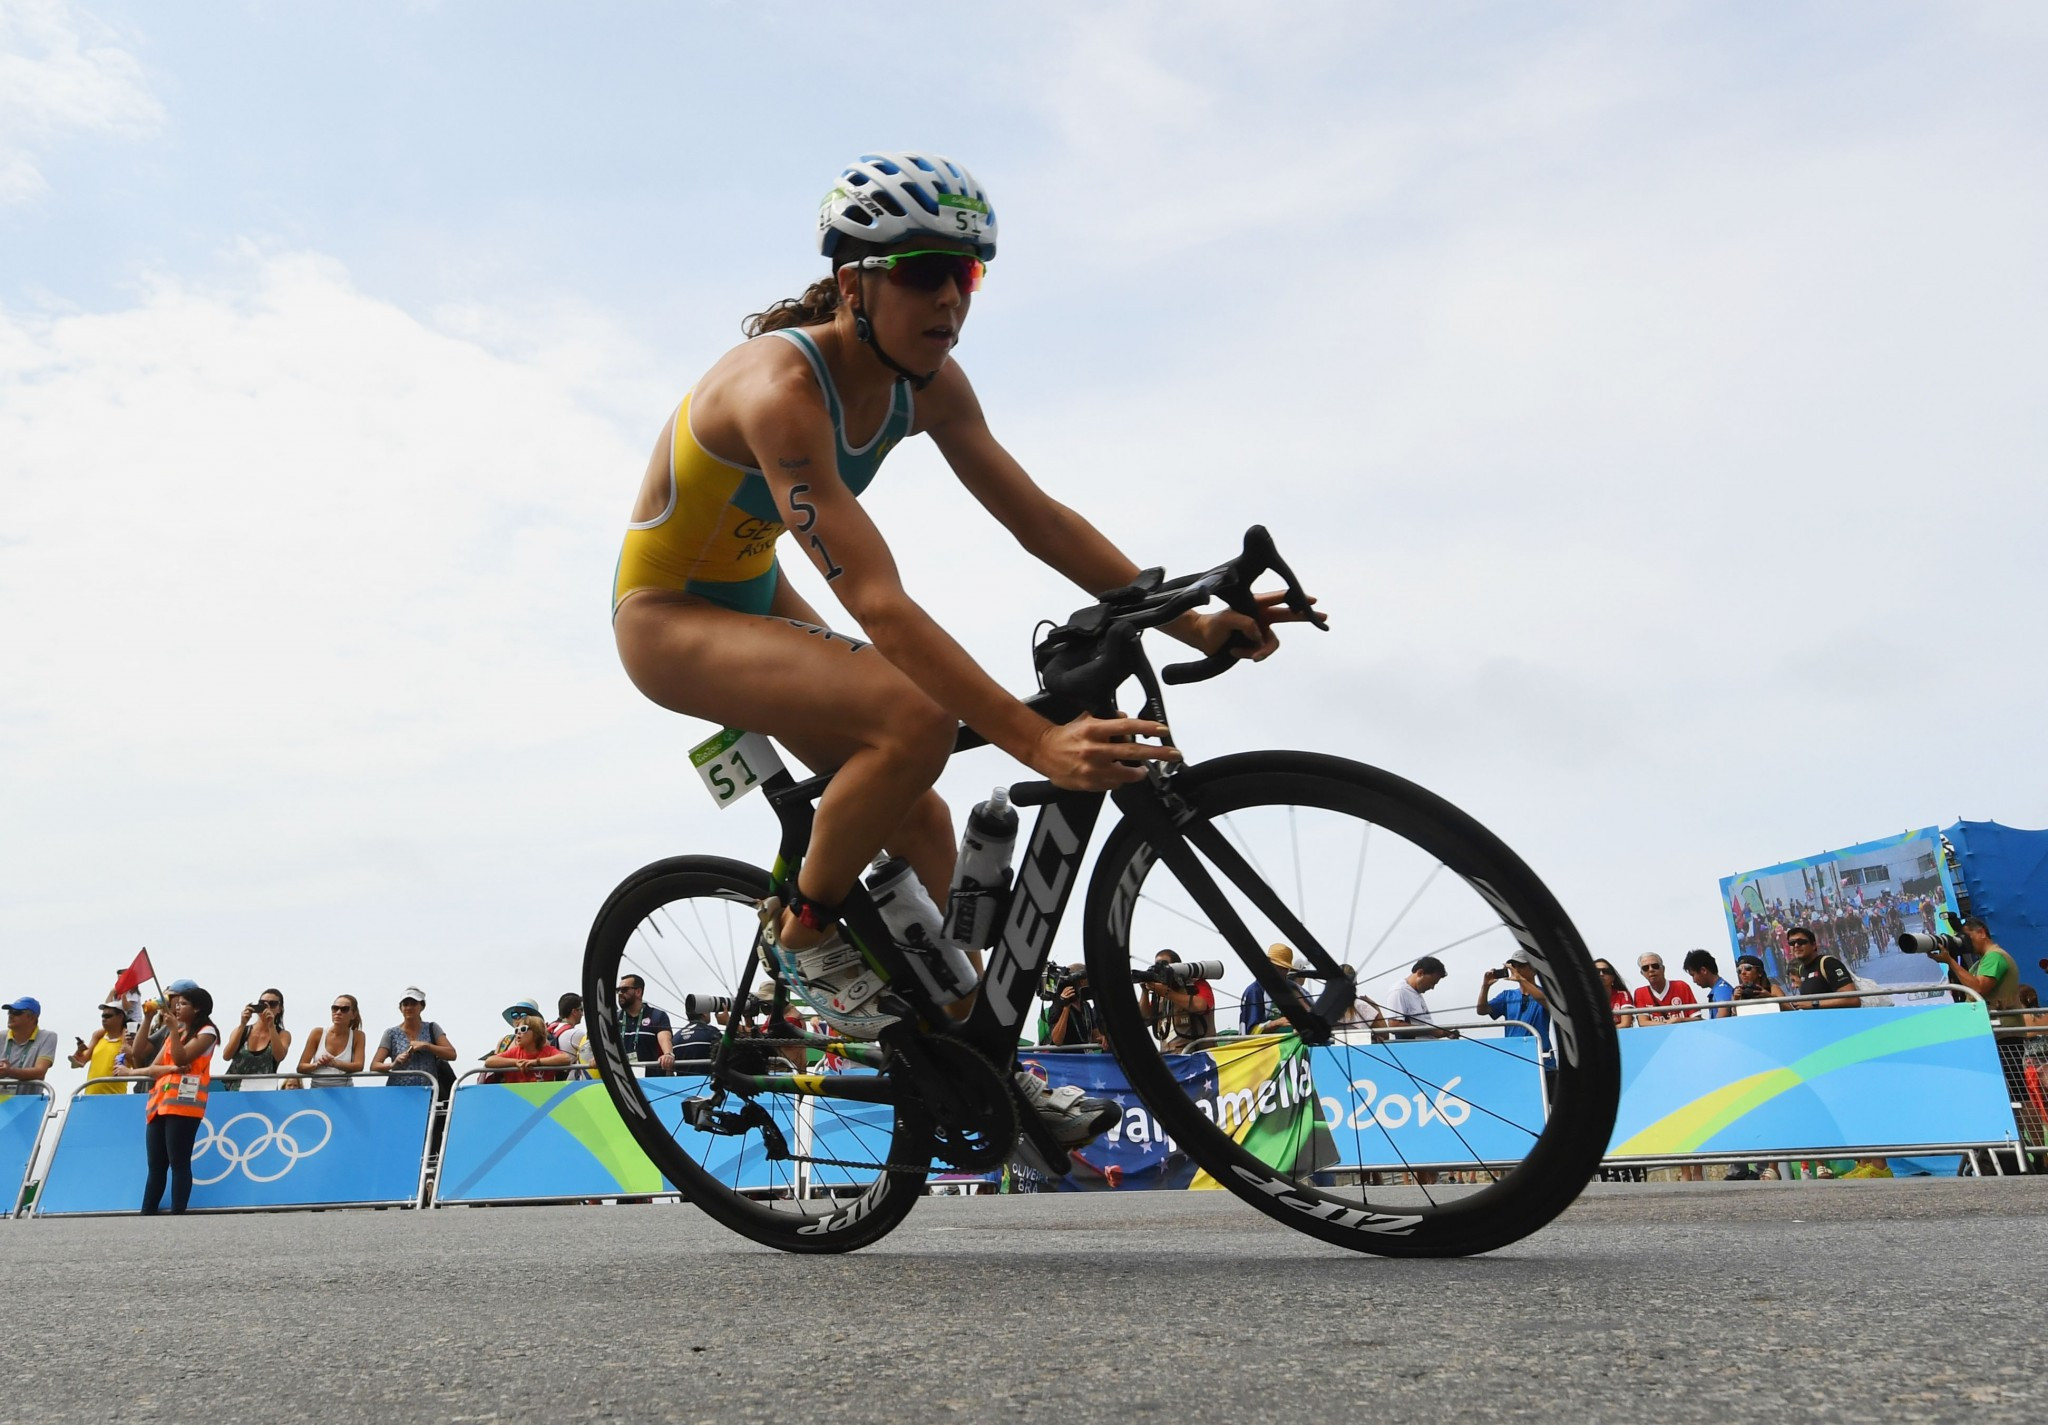 Ashleigh Gentle has earned her first win on the WTS circuit ©Getty Images